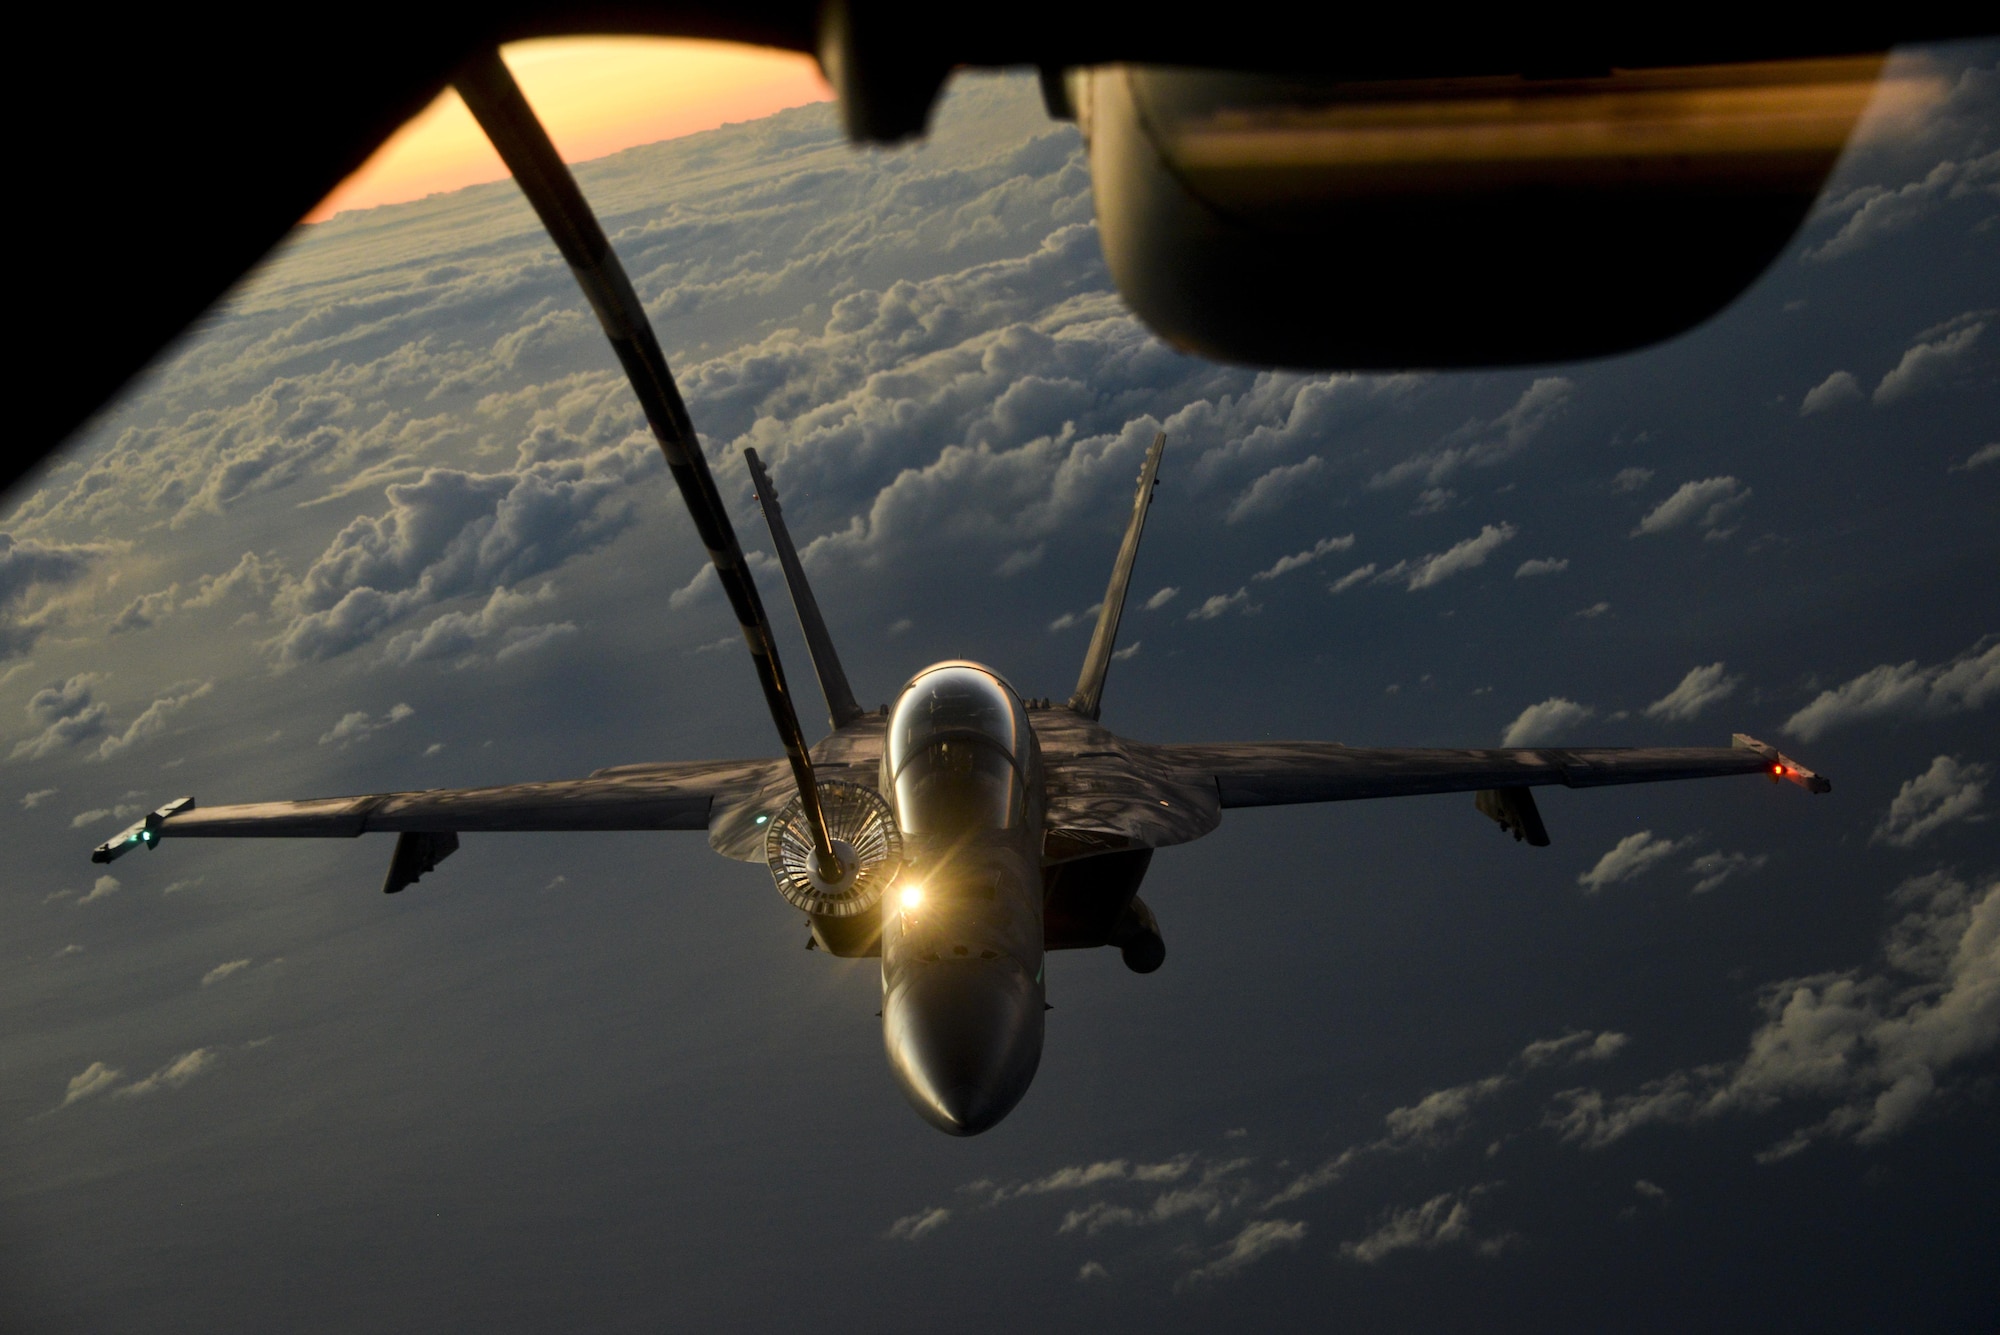 A U.S. Air Force KC-10 Extender from Travis Air Force Base, California, refuels a U.S. Navy F/A-18 Super Hornet over the Pacific Ocean July 14, 2017. KC-10s from Travis AFB supported Exercise Talisman Saber 2017 by conducting various air refueling missions over Australia. TS17 is a biennial exercise in Australia that focuses on bilateral military training between U.S. Pacific Command forces and the Australian Defence Force to improve U.S.-Australia combat readiness, increase interoperability, maximize combined training opportunities and conduct maritime prepositioning and logistics operations in the Pacific. (U.S. Air Force photo by 2nd Lt. Sarah Johnson)